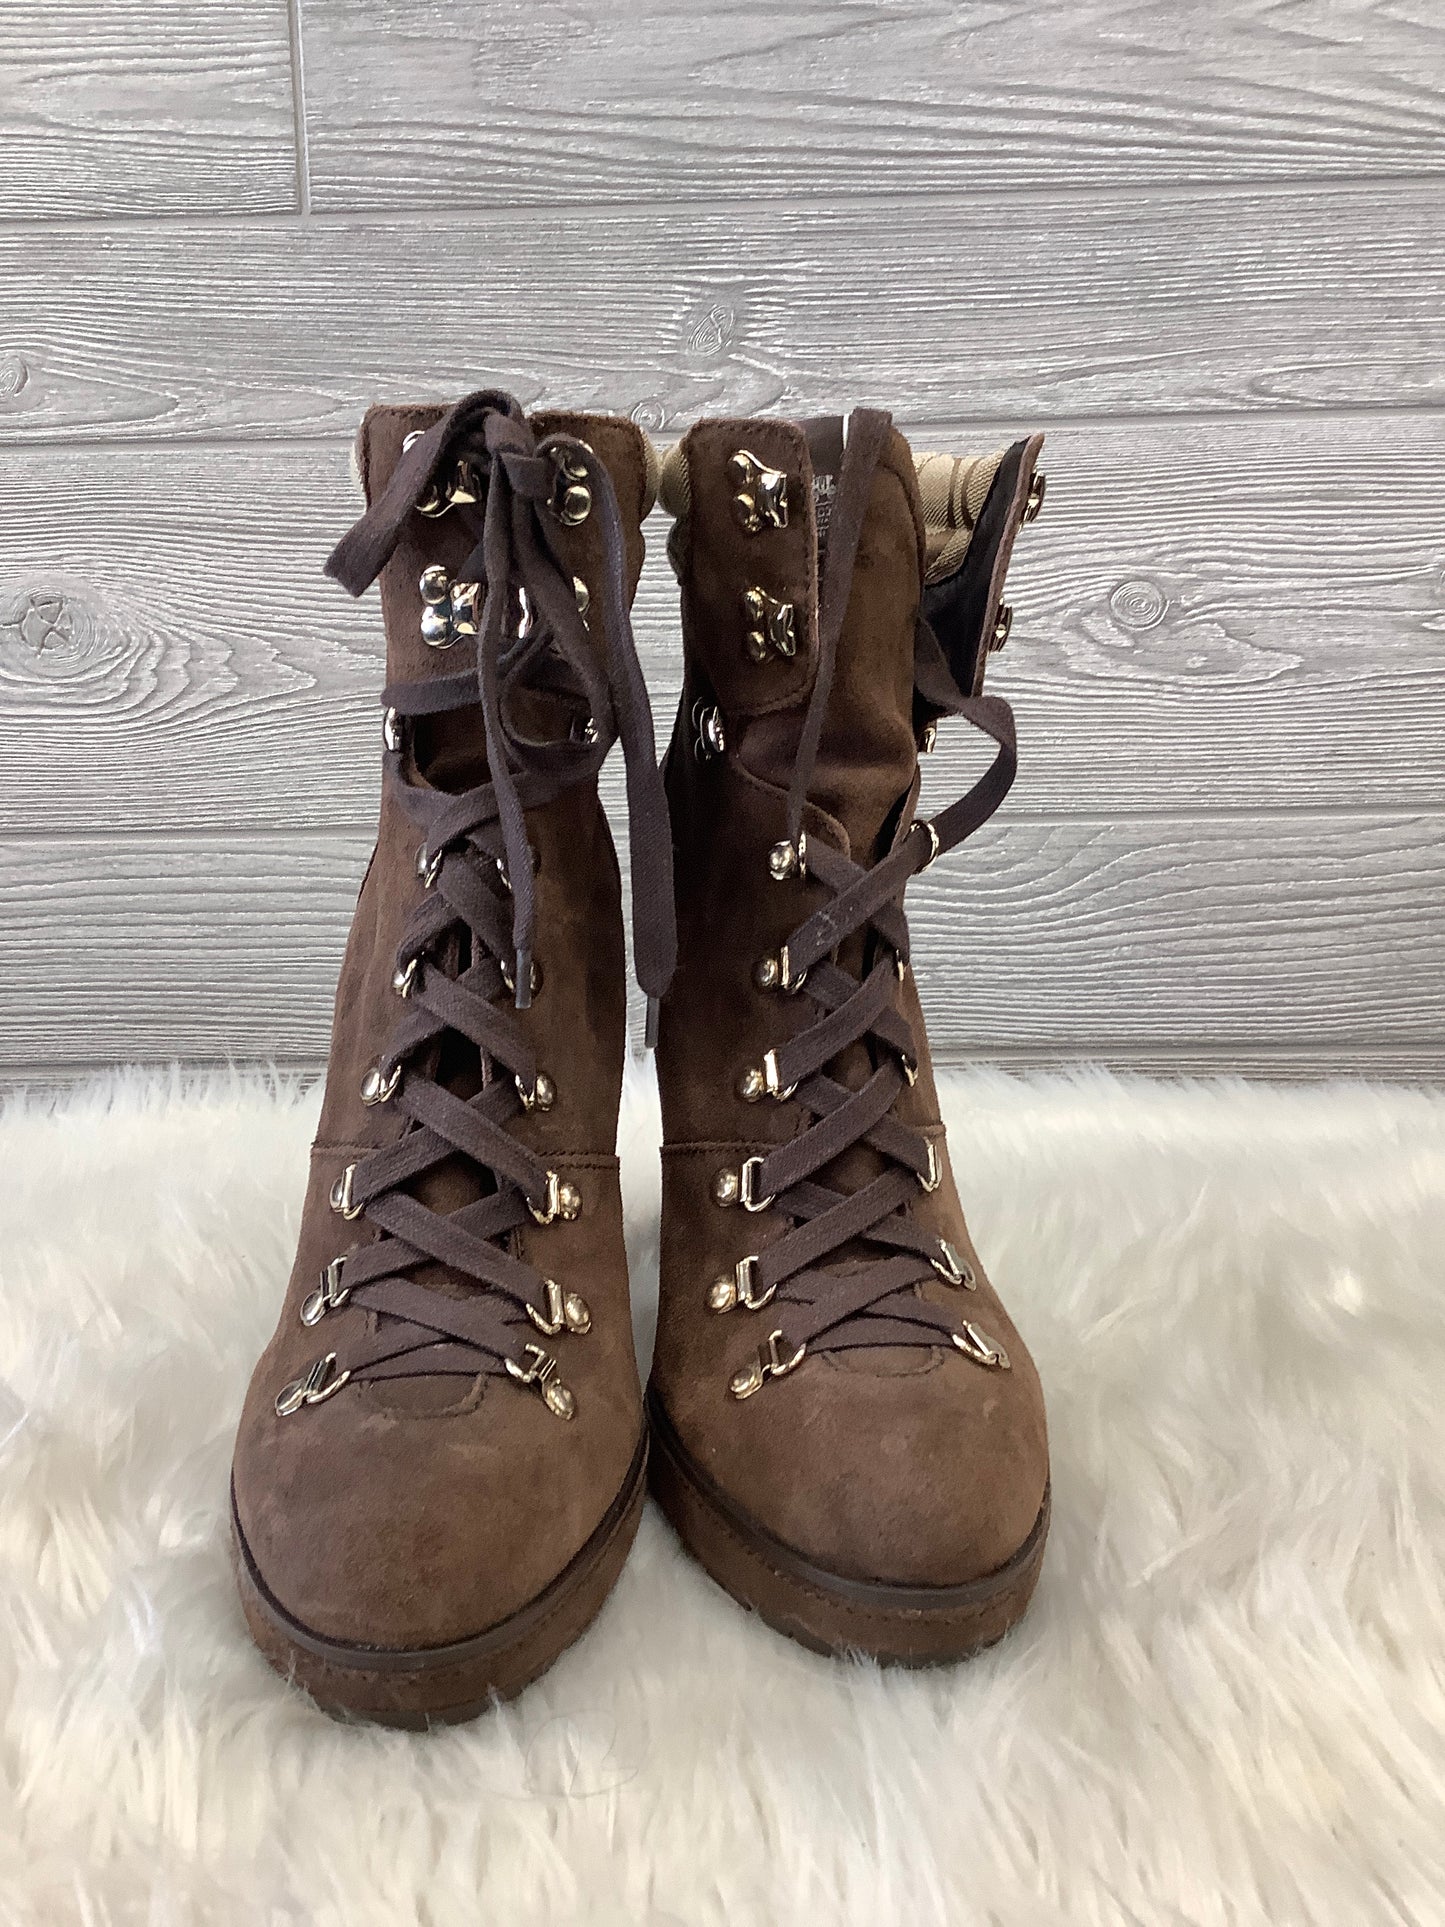 Boots Designer By Coach  Size: 11